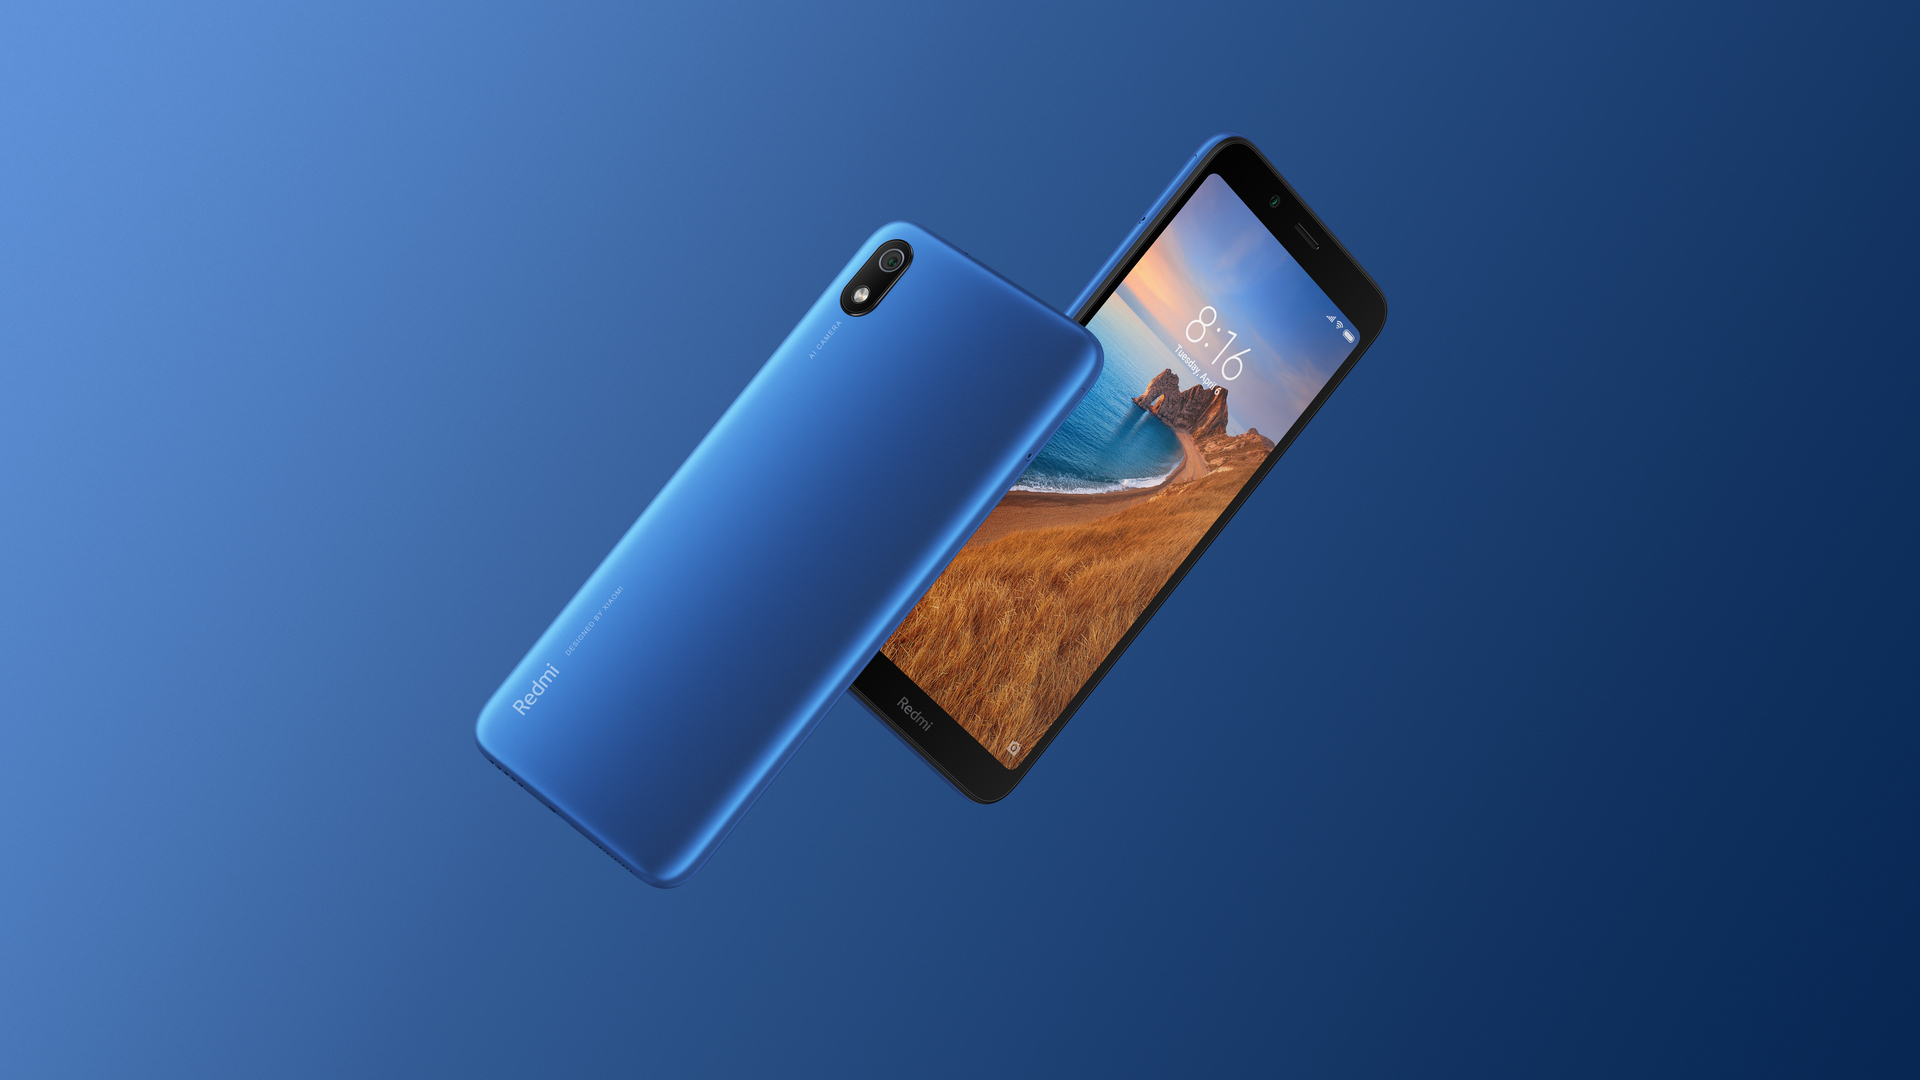 The Redmi 7A in blue front and back.